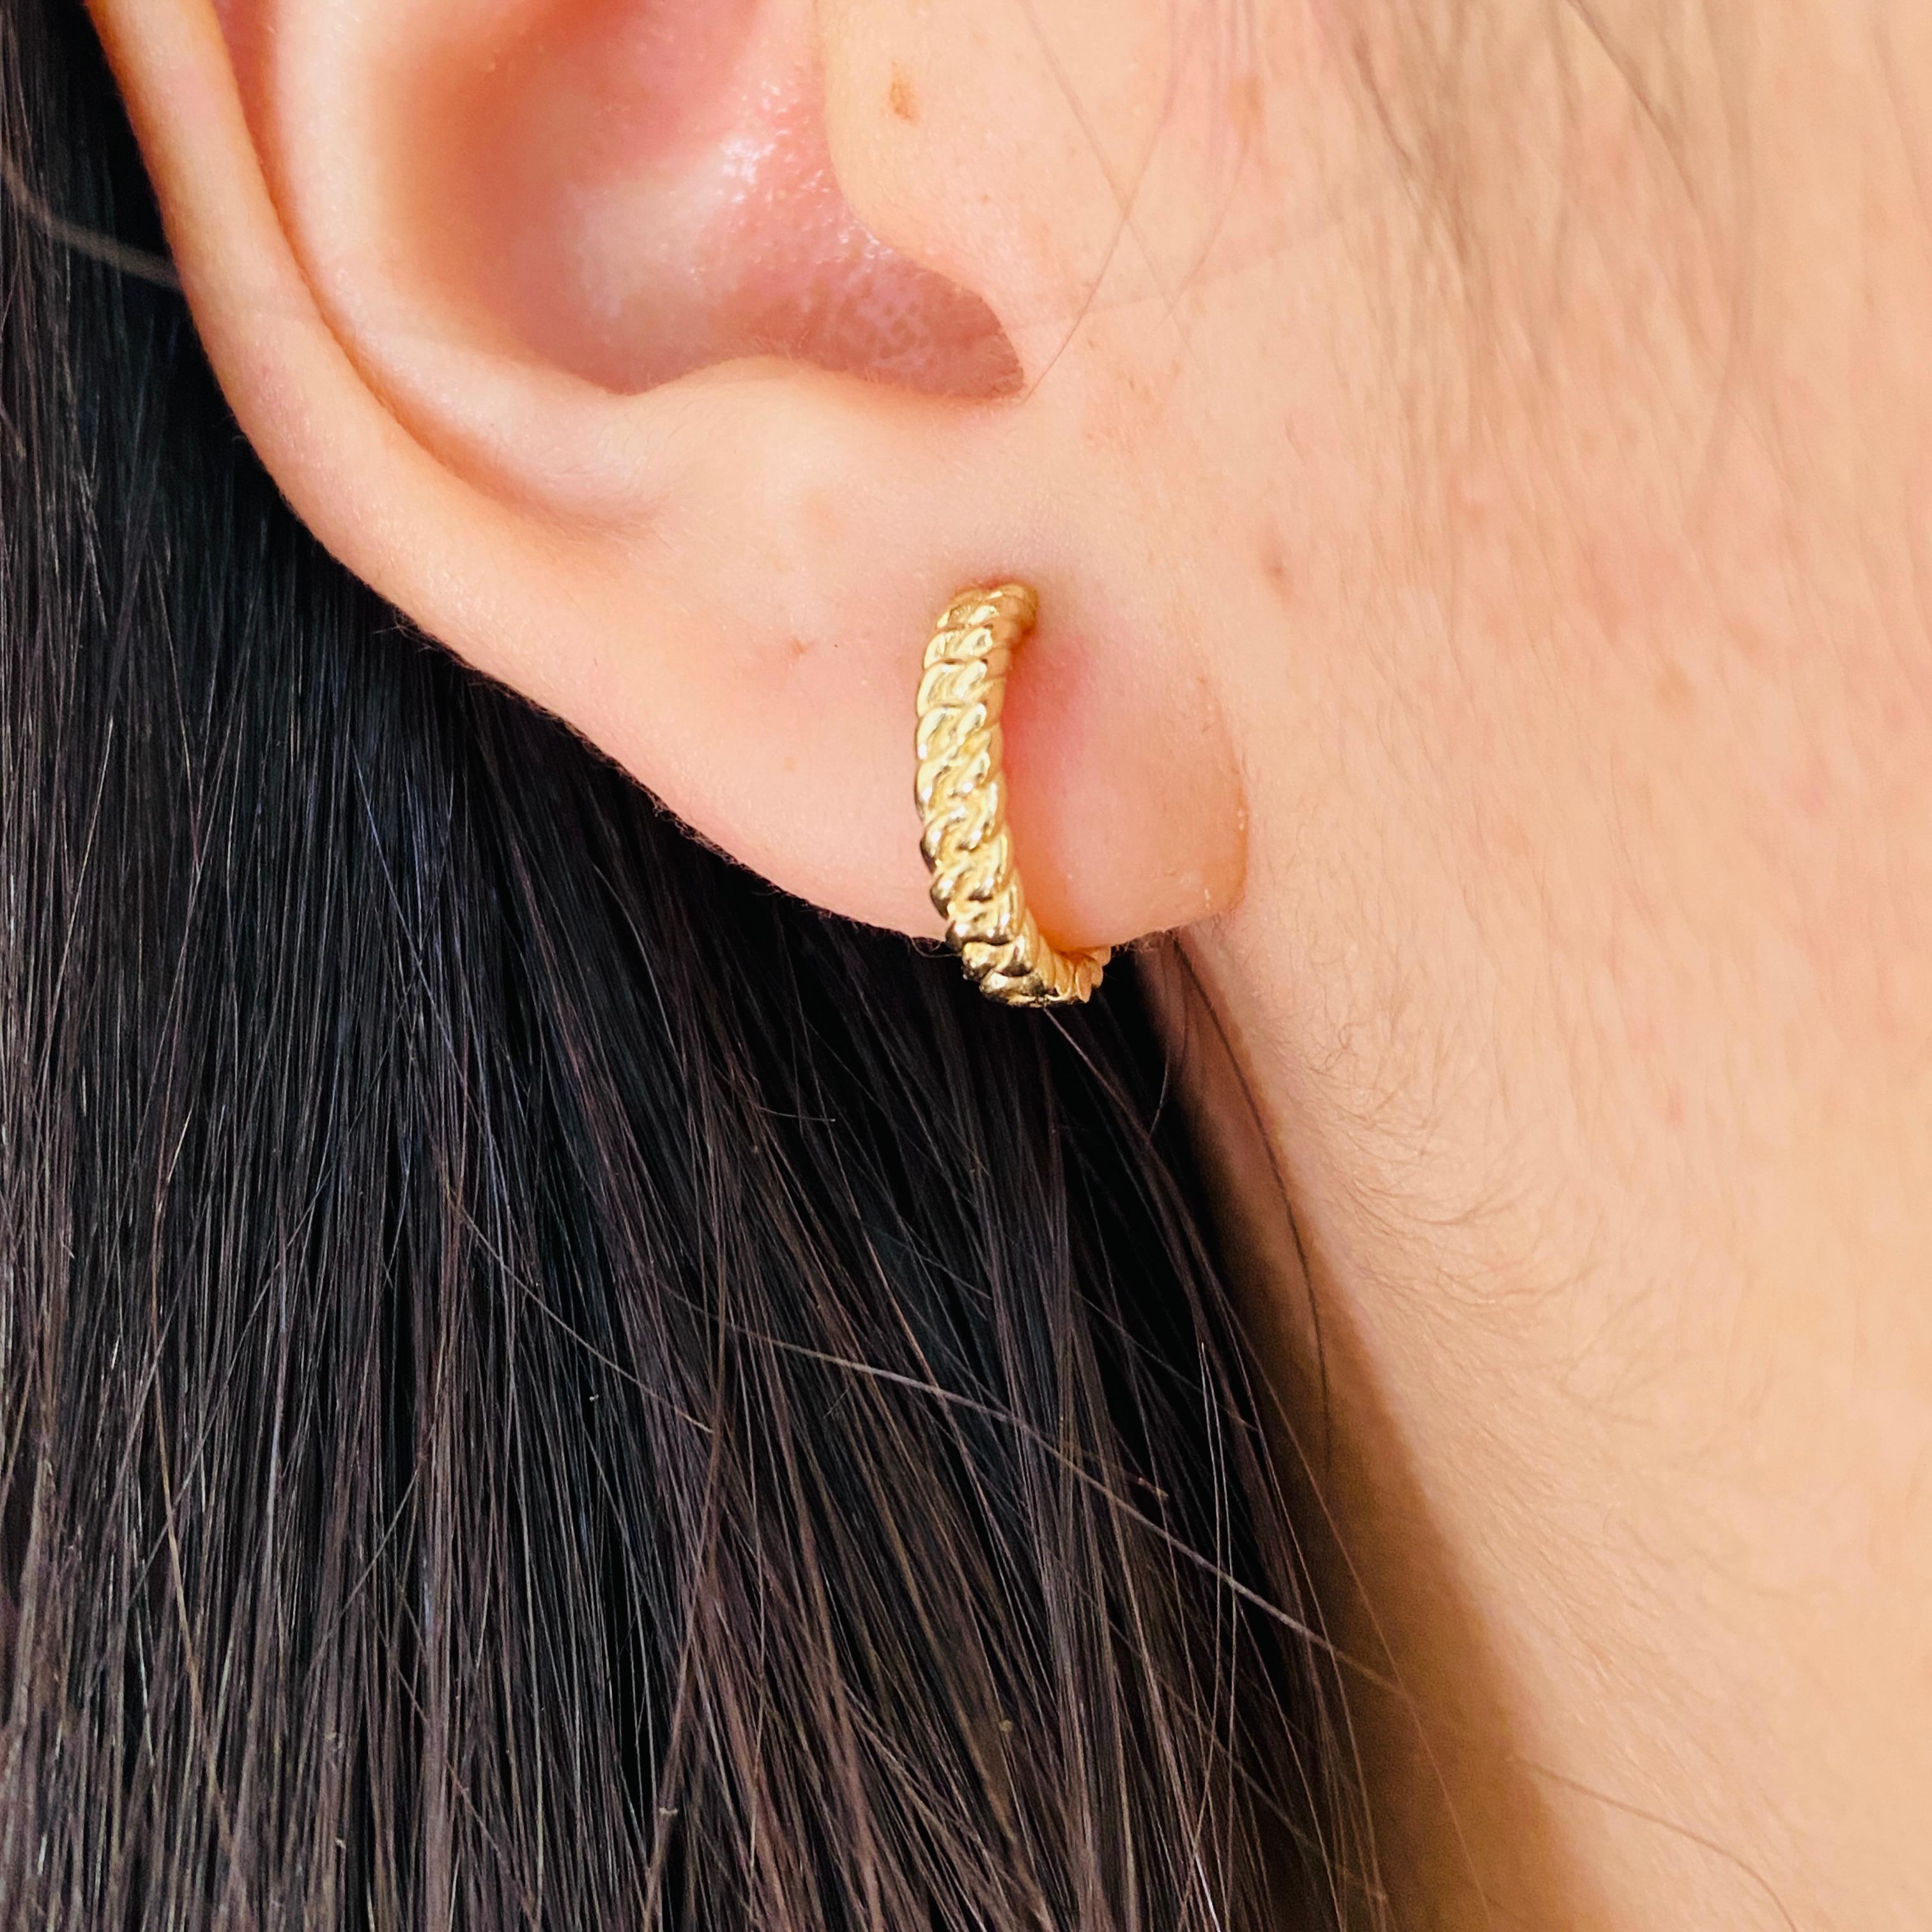 These braided beauties are the perfect earring to wrap around your earlobe! The braided design is classic in these dainty hoops and perfect for wearing everyday. Once you try them, you know why huggie hoops have become a favorite type of earring!